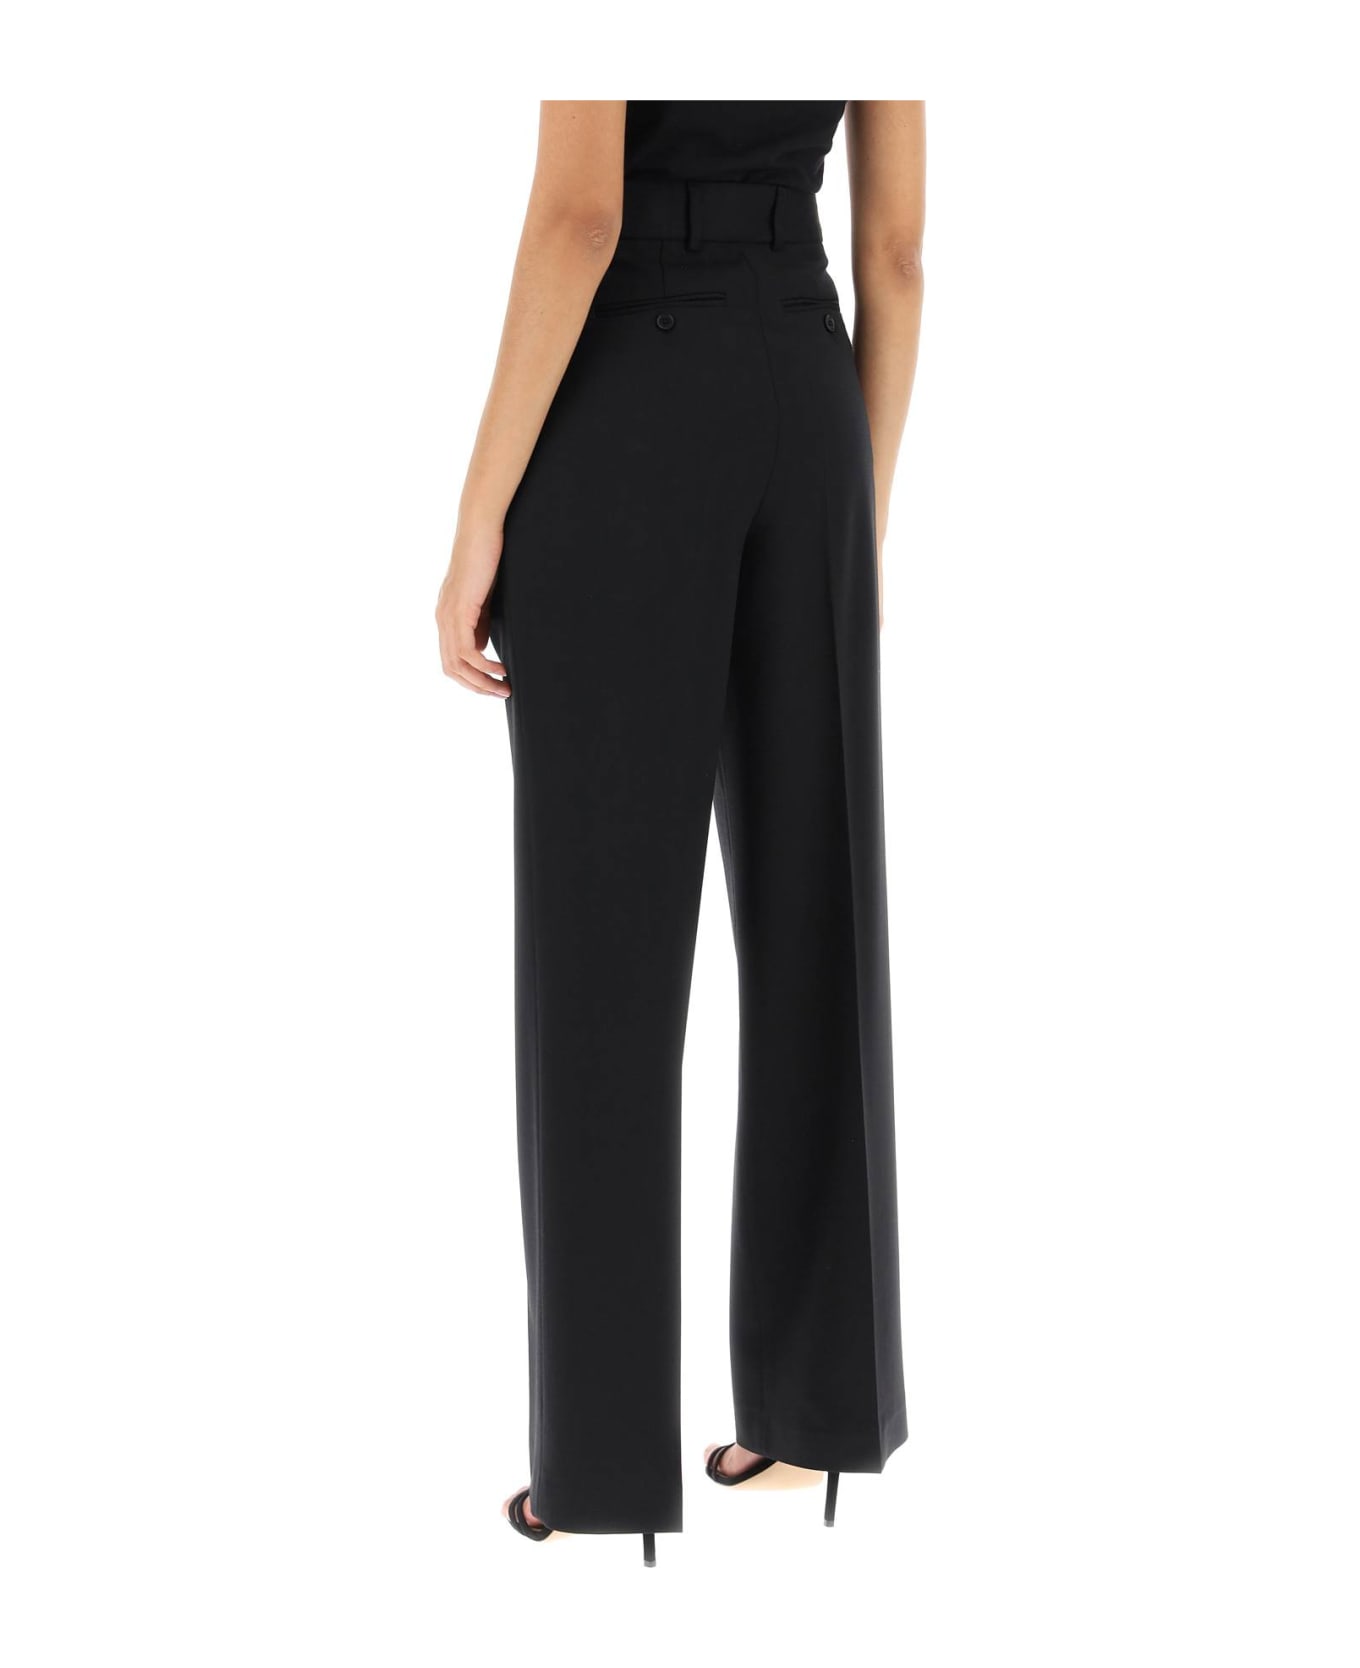 MSGM Tailoring Pants With Wide Leg - Black